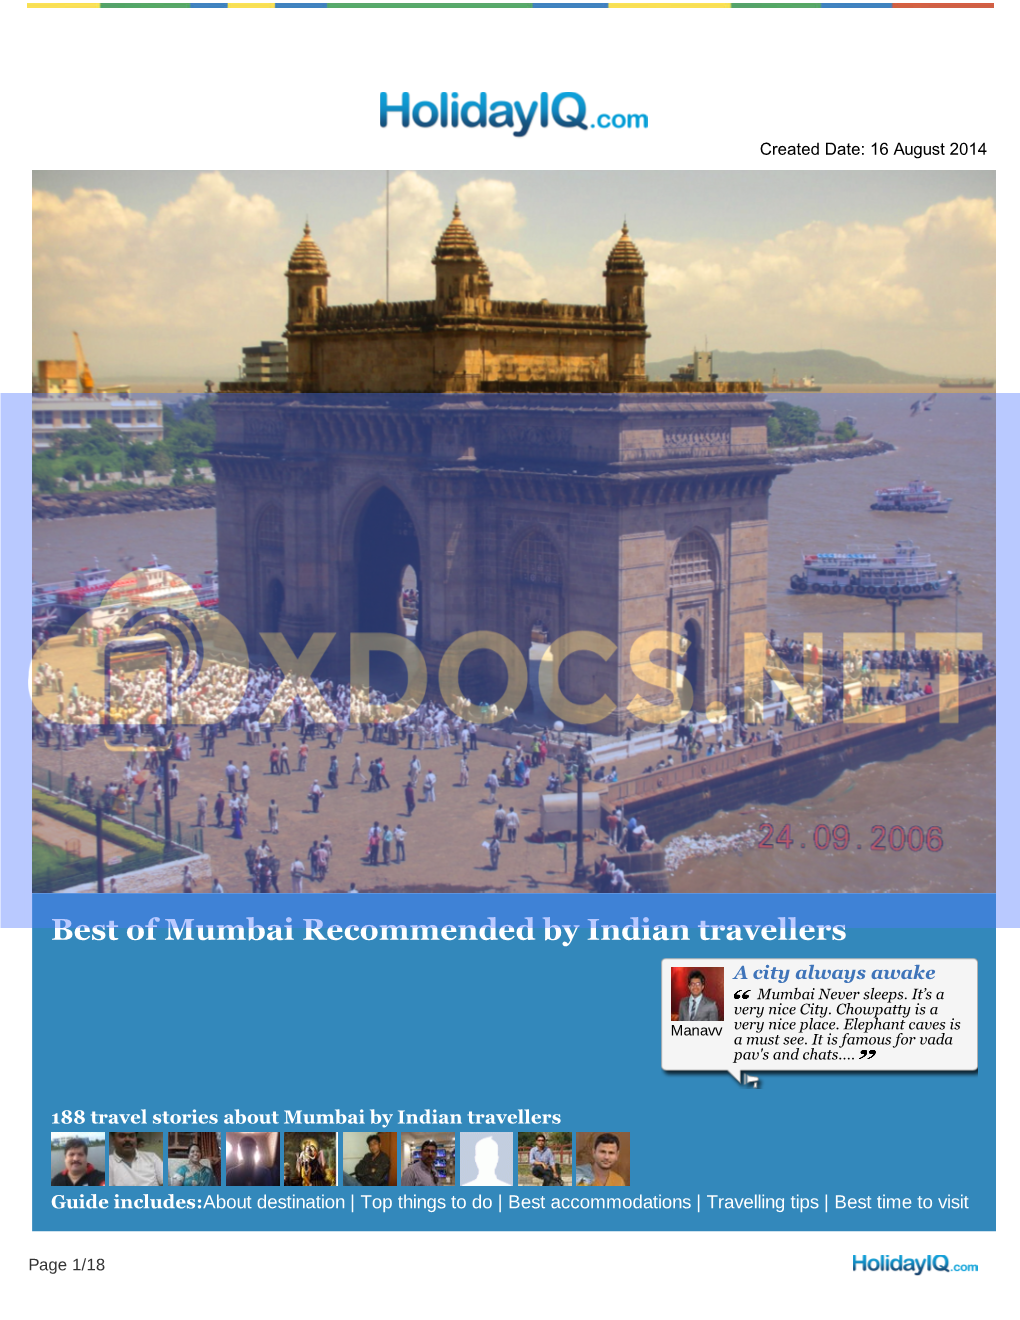 Best of Mumbai Recommended by Indian Travellers a City Always Awake Mumbai Never Sleeps